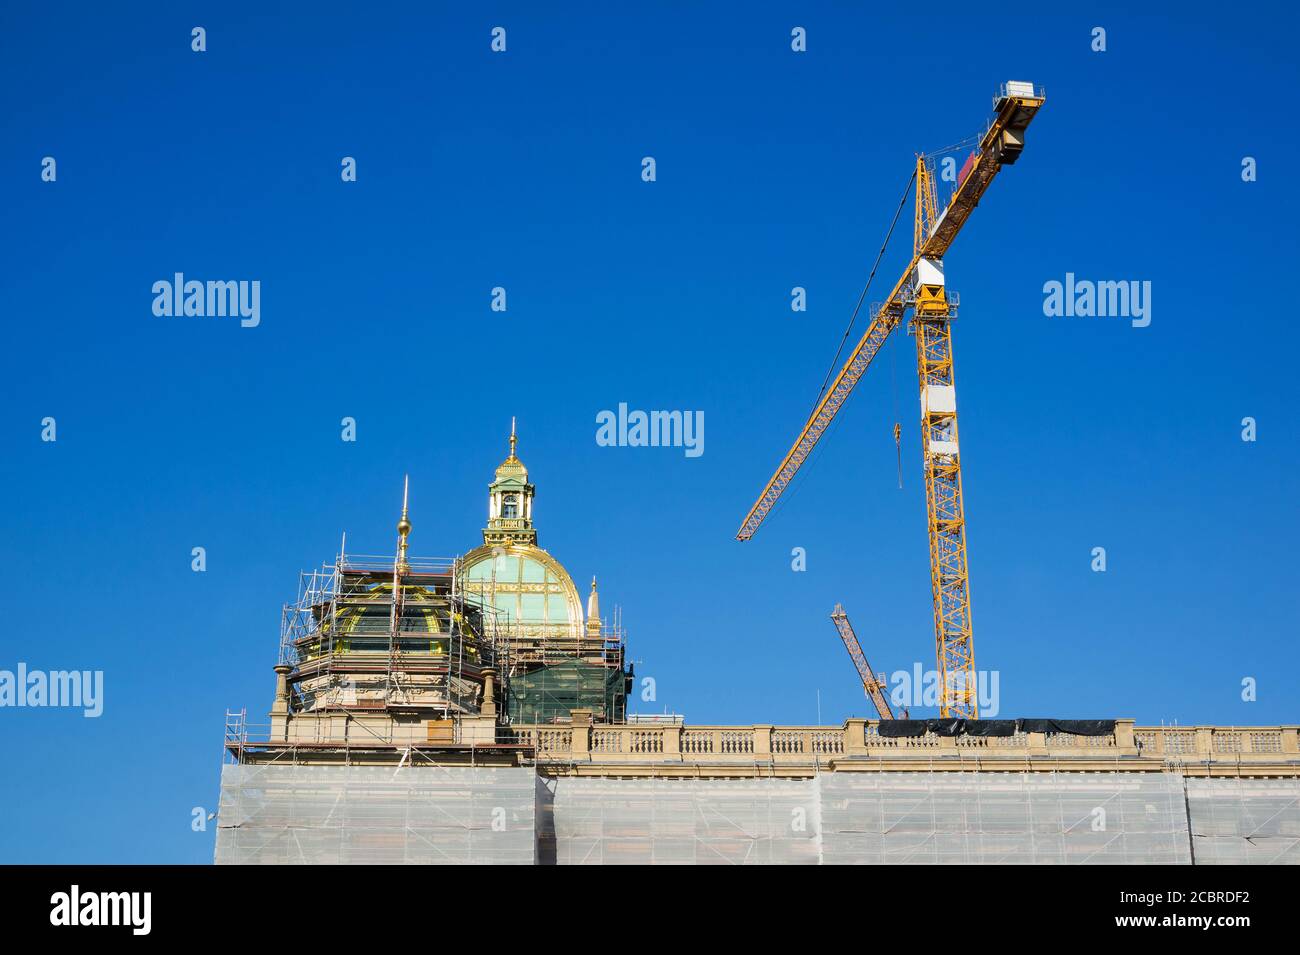 Old historic building with shiny cupola and dome is reconstructed, restored, and renovated. Scaffold and crane is used for reconstruction, renovation Stock Photo